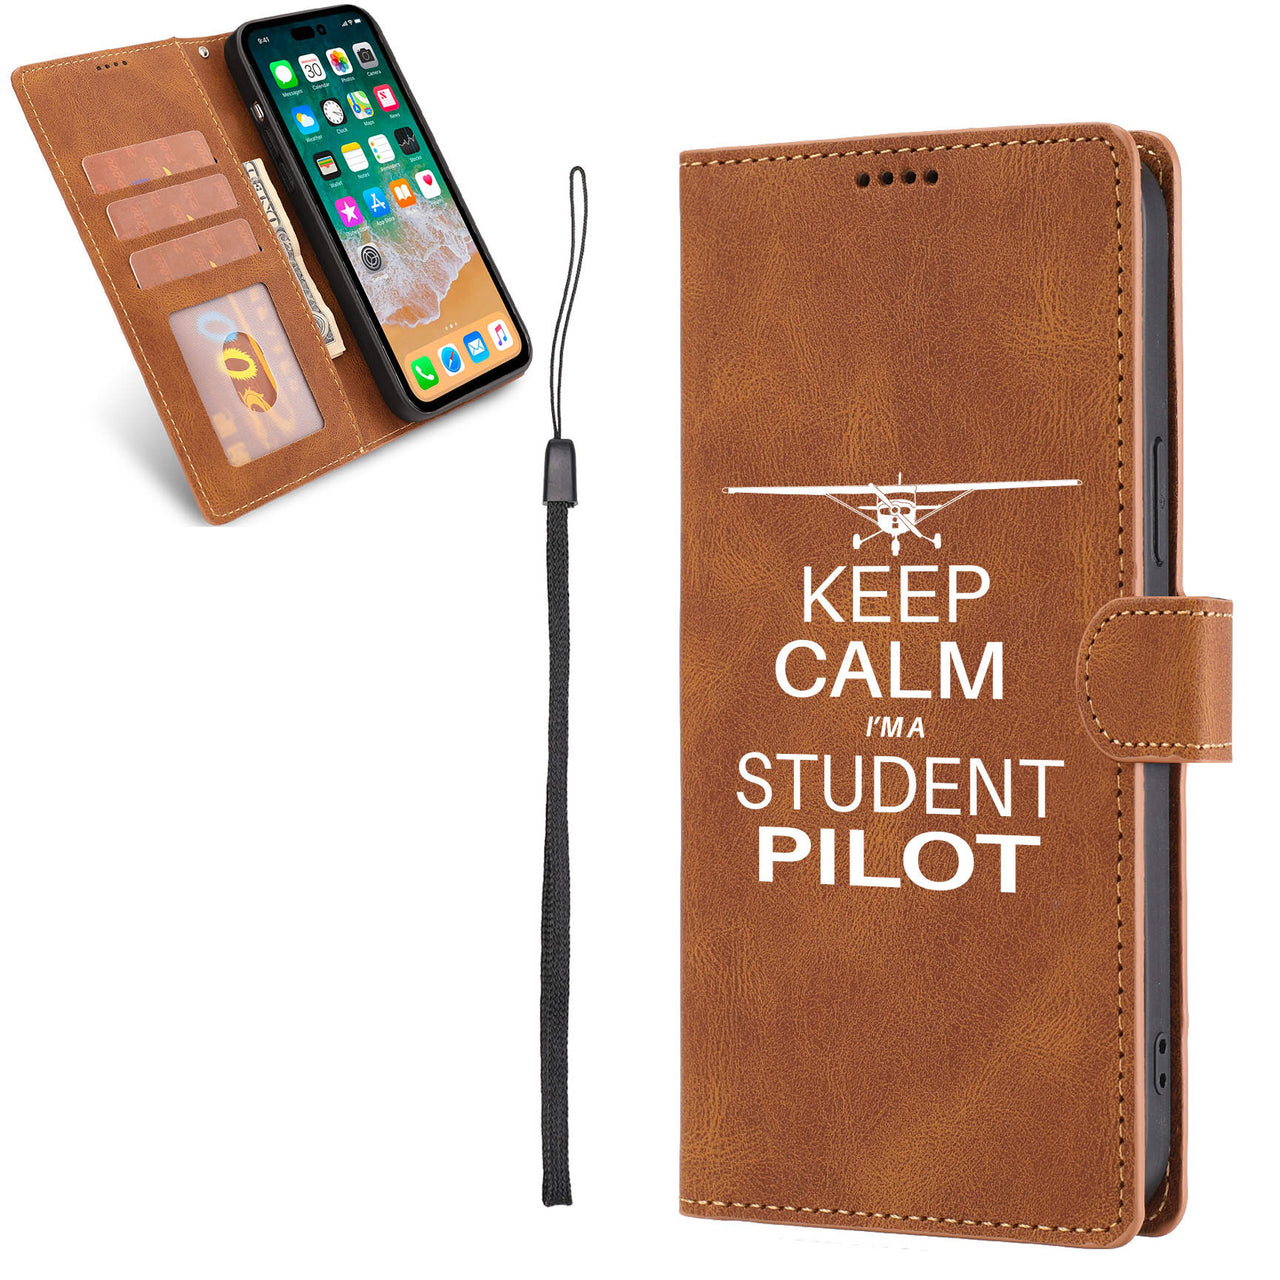 Student Pilot Designed Leather iPhone Cases